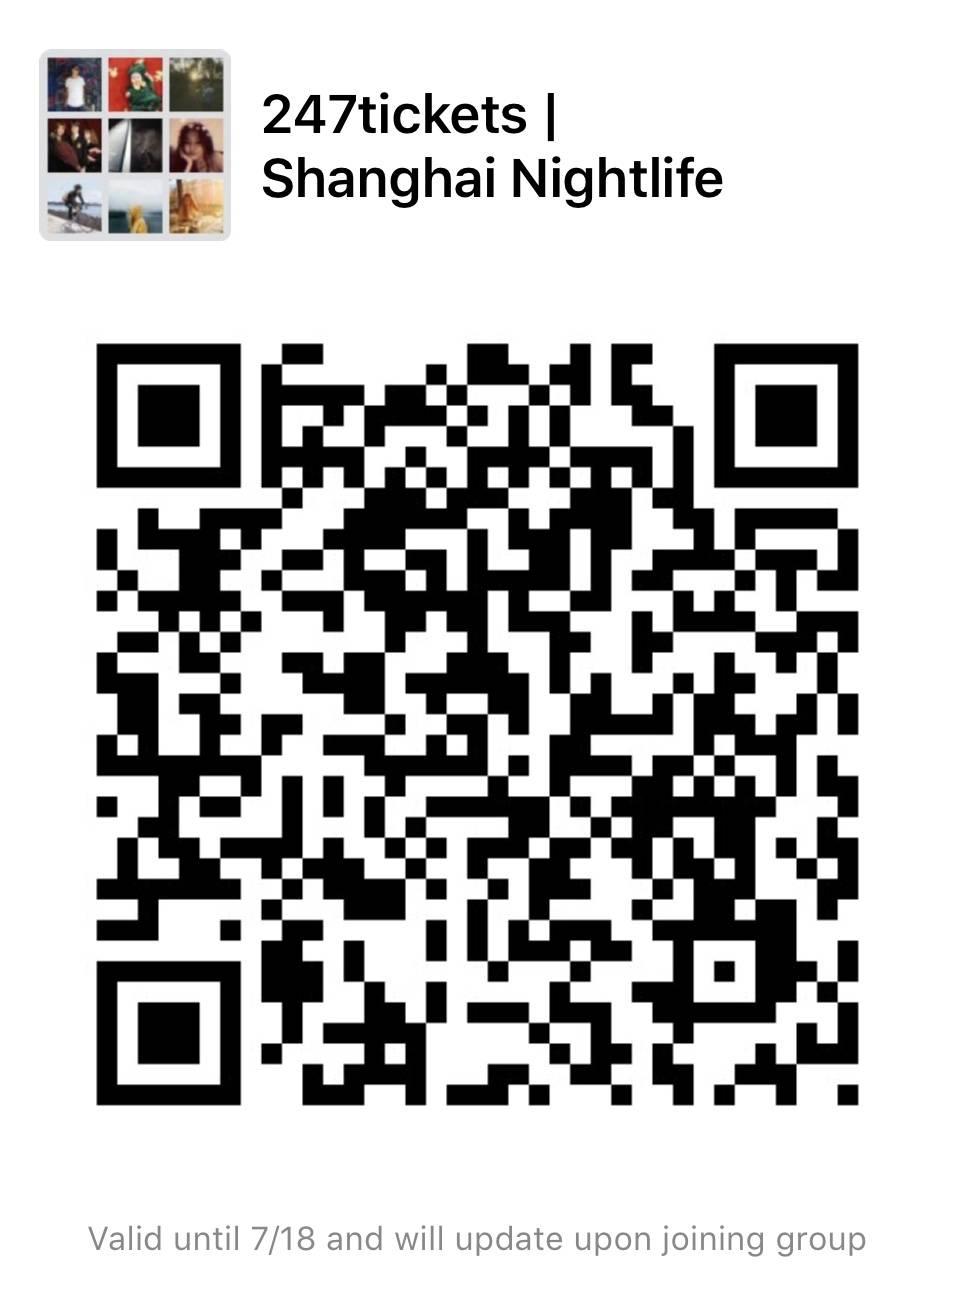 Scan the QR code to join our WeChat group for more info! 